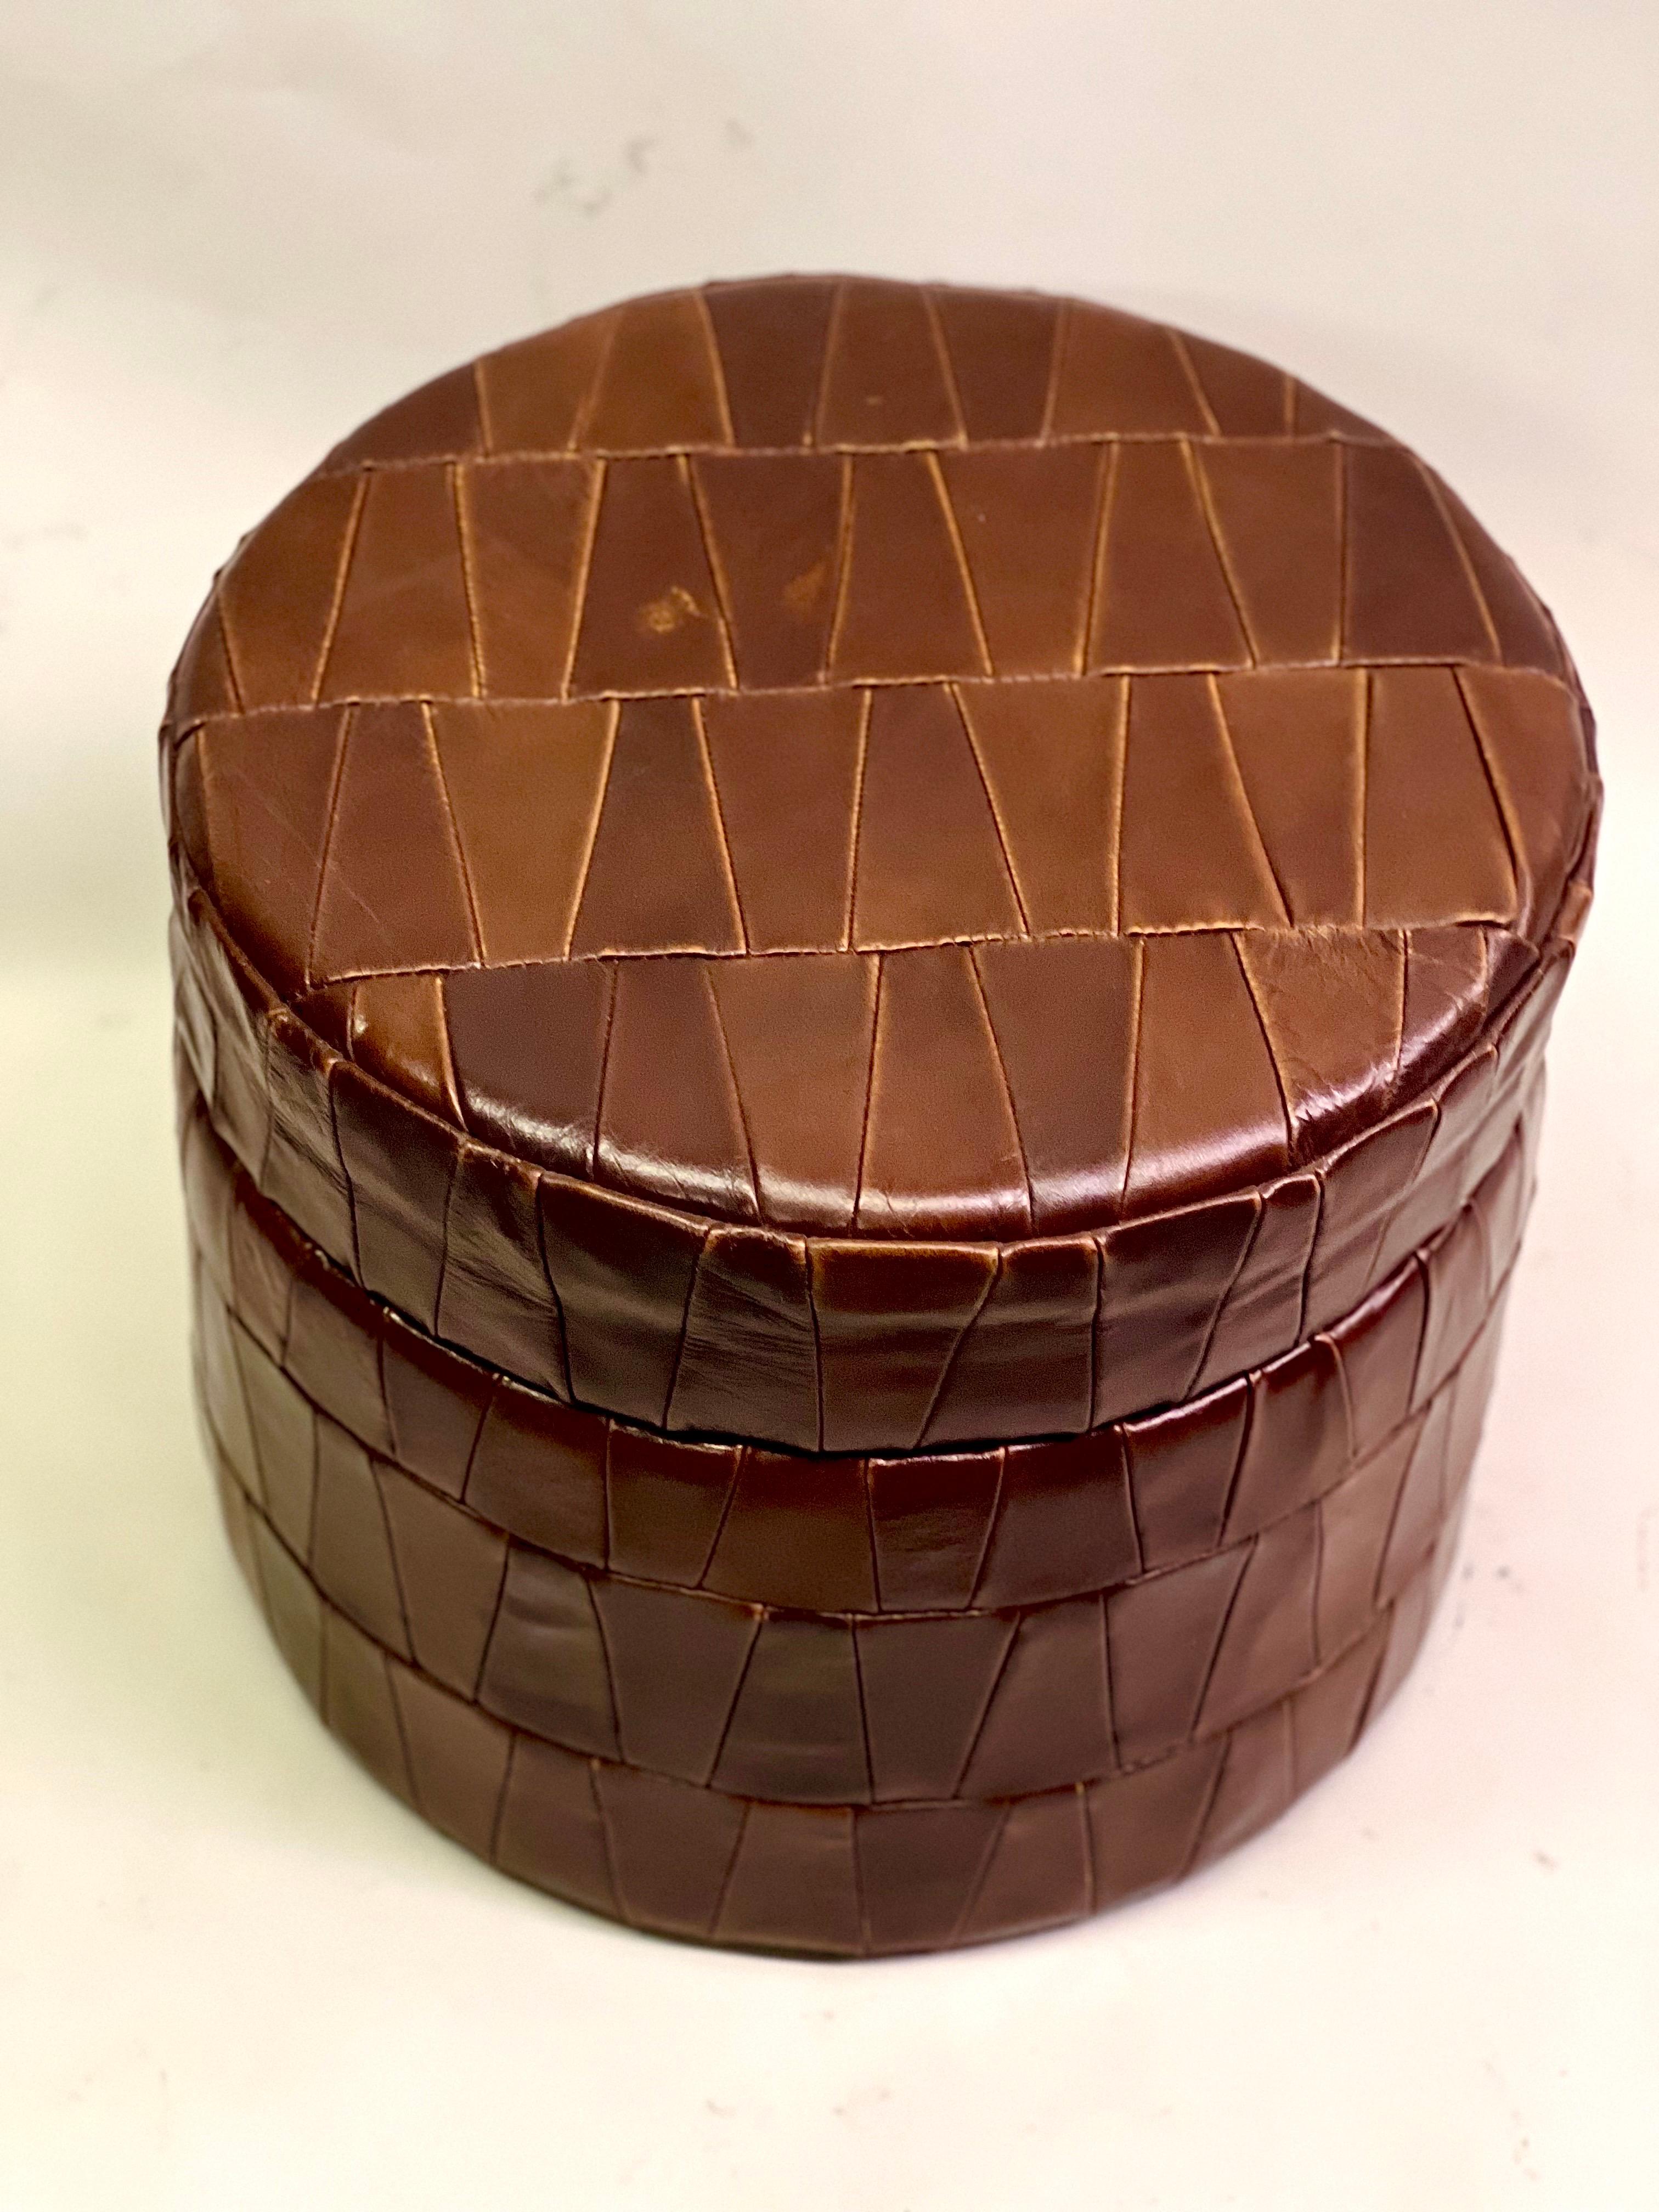 Pair of Swiss Modern Patchwork Leather Storage Ottomans/ Stools by De Sede, 1960 For Sale 5